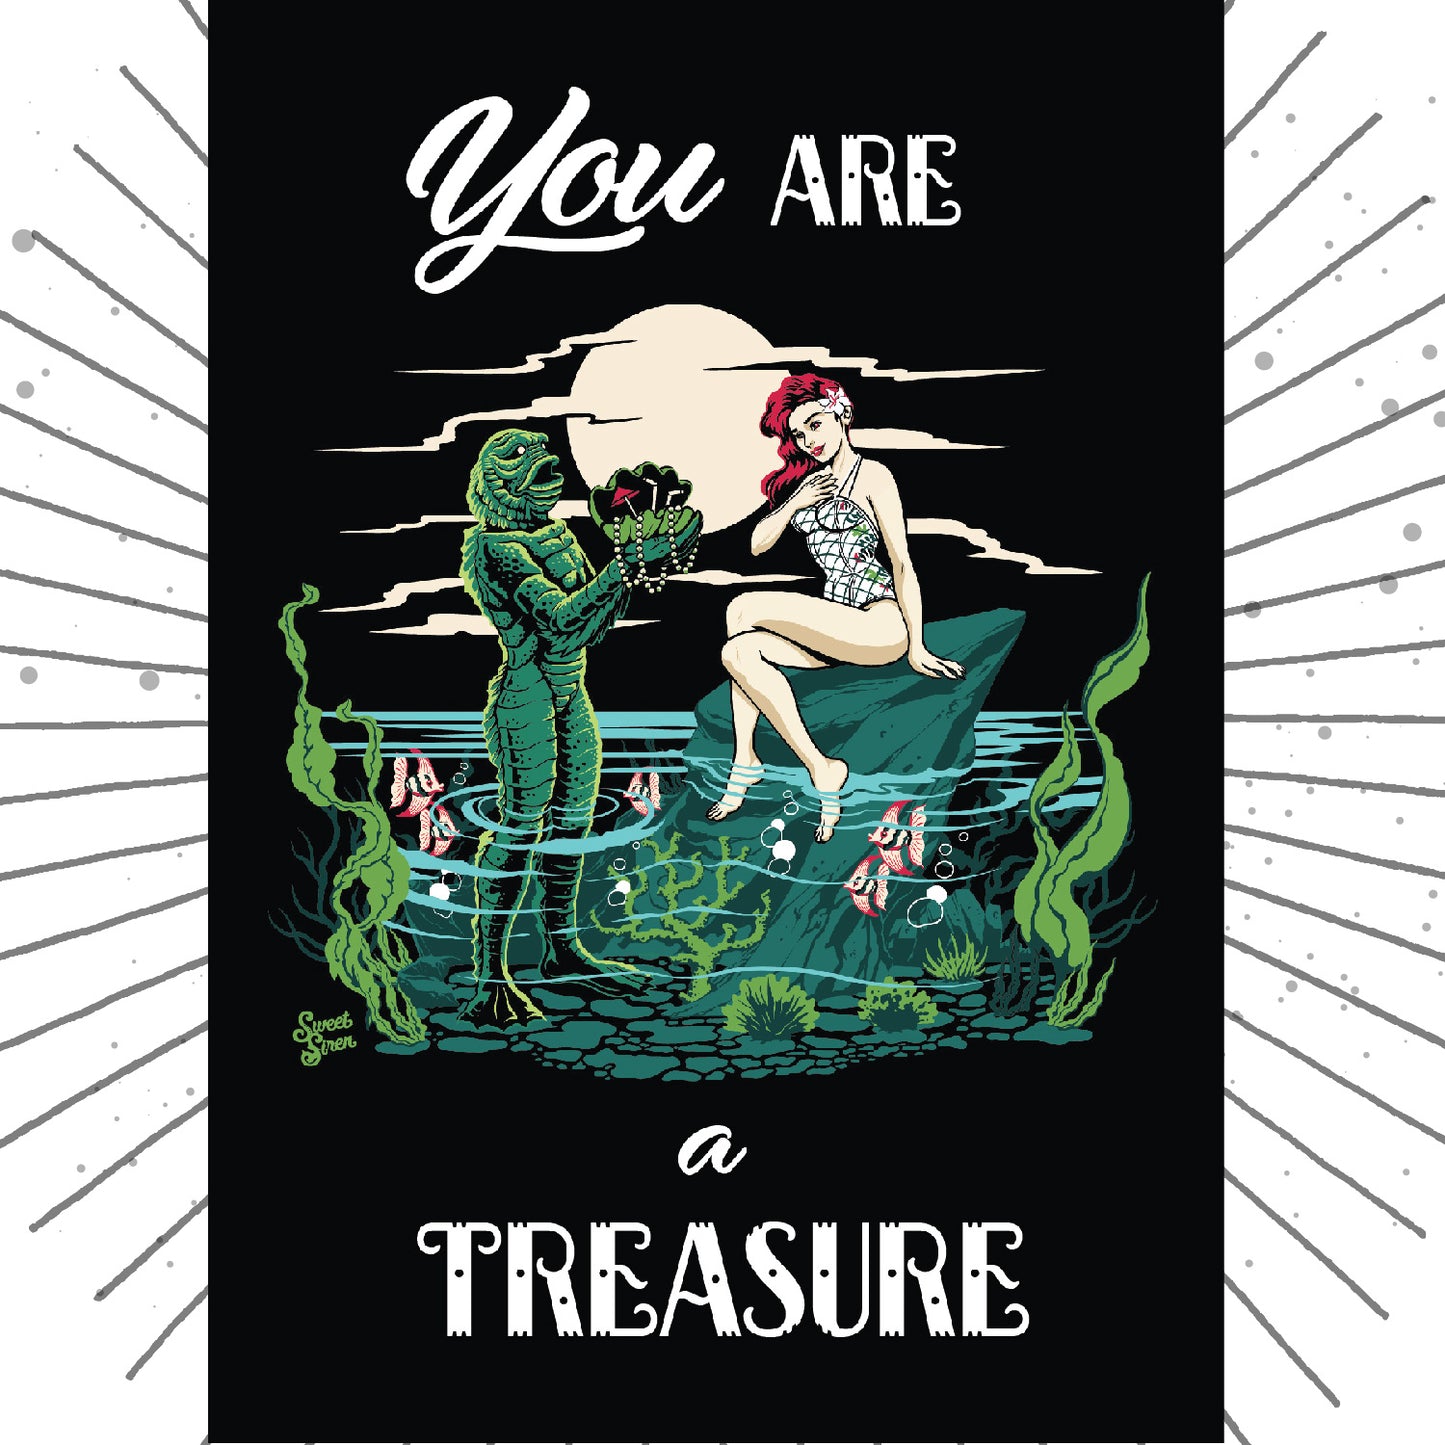 You are a Treasure- Creature - Greeting Card